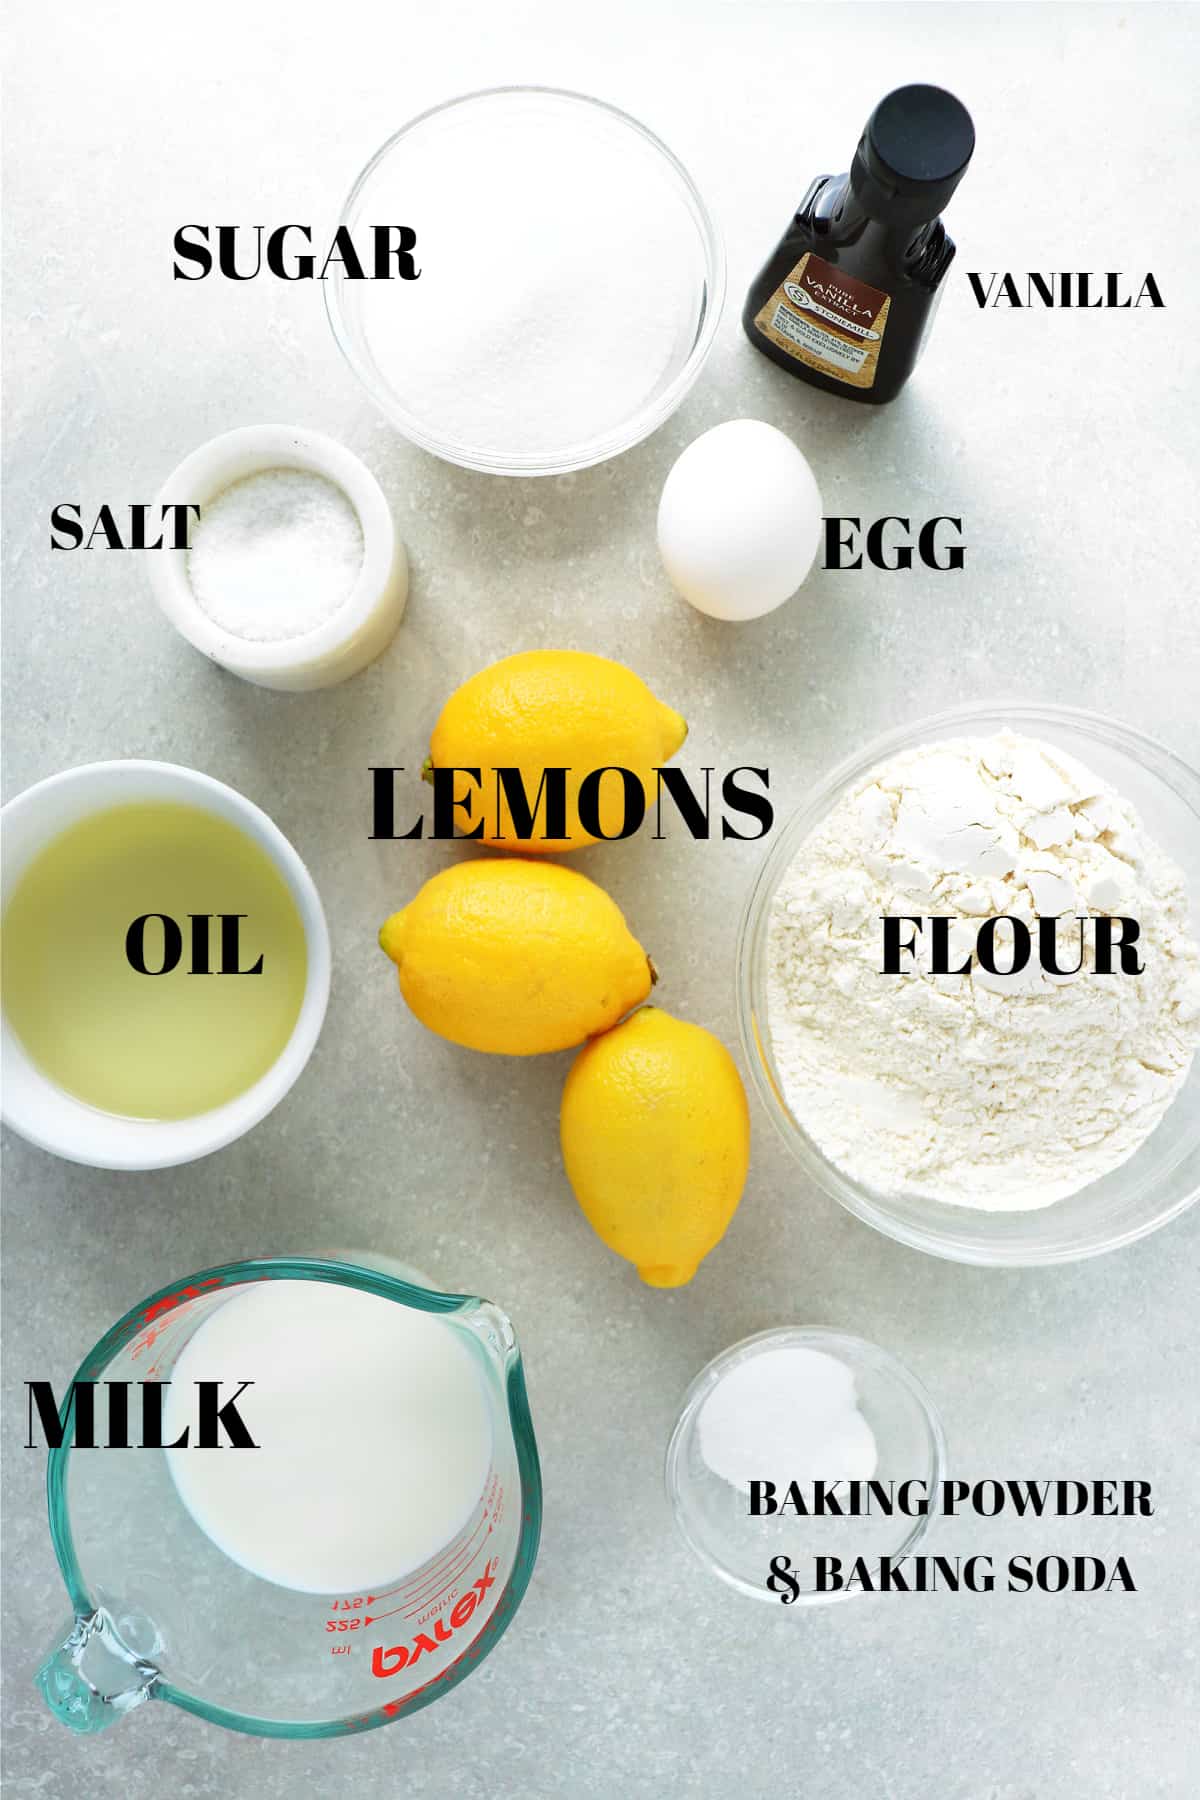 All ingredients for lemon cake on a gray board.